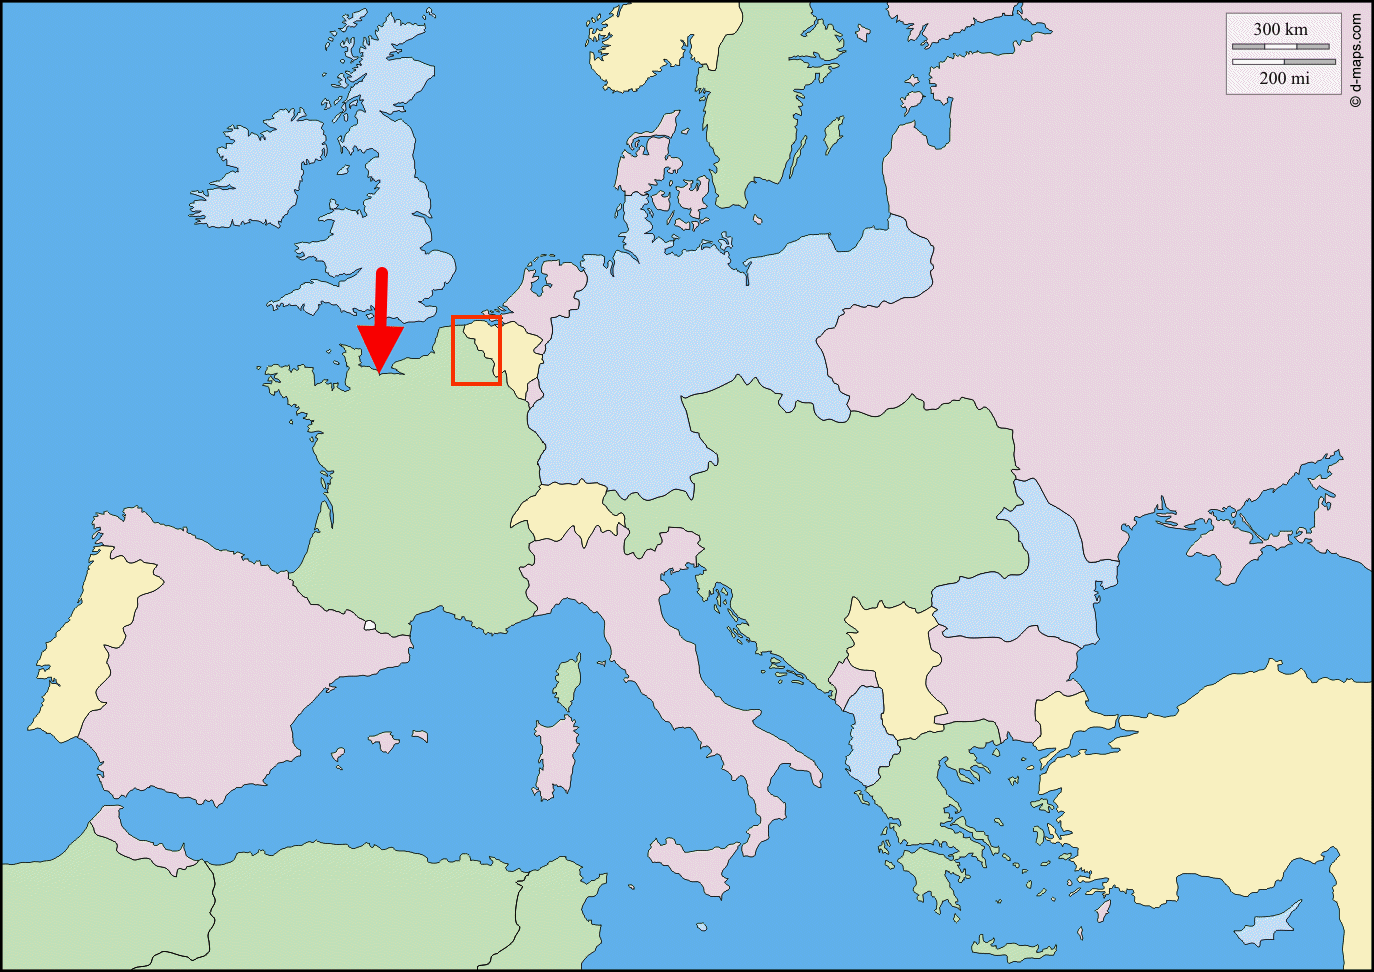 1914 map of Europe with a red arrow pointing at the coastline of France and a red rectangle along the border between France and Belgium.